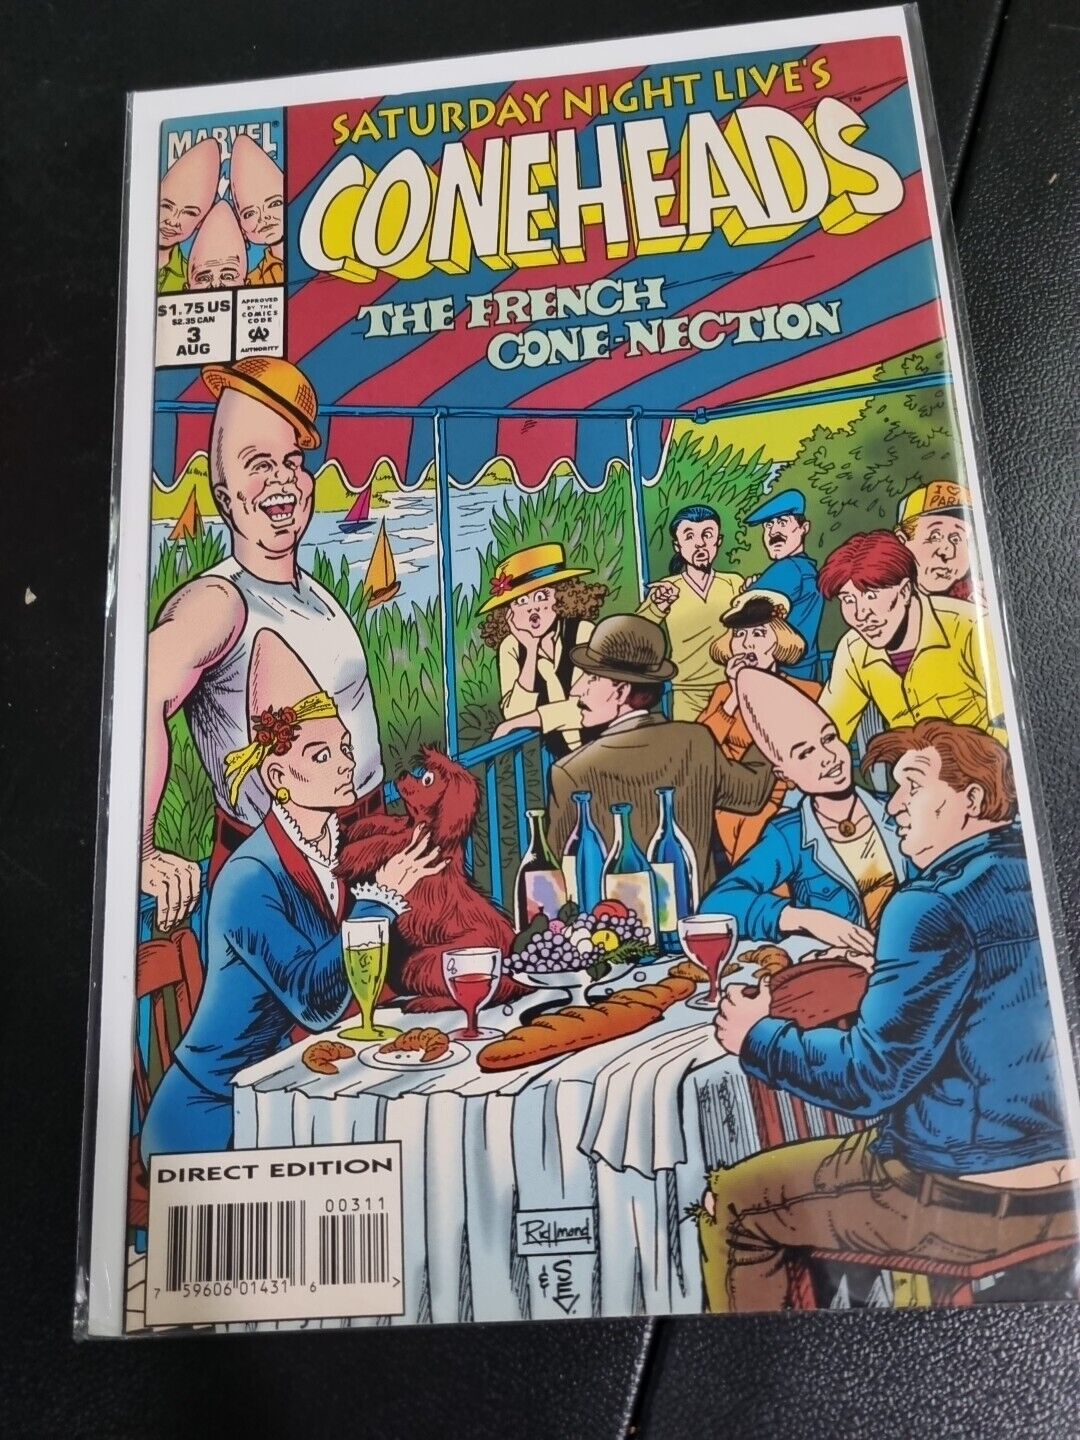 Coneheads #3 (Aug 1994, Marvel) Direct Edition